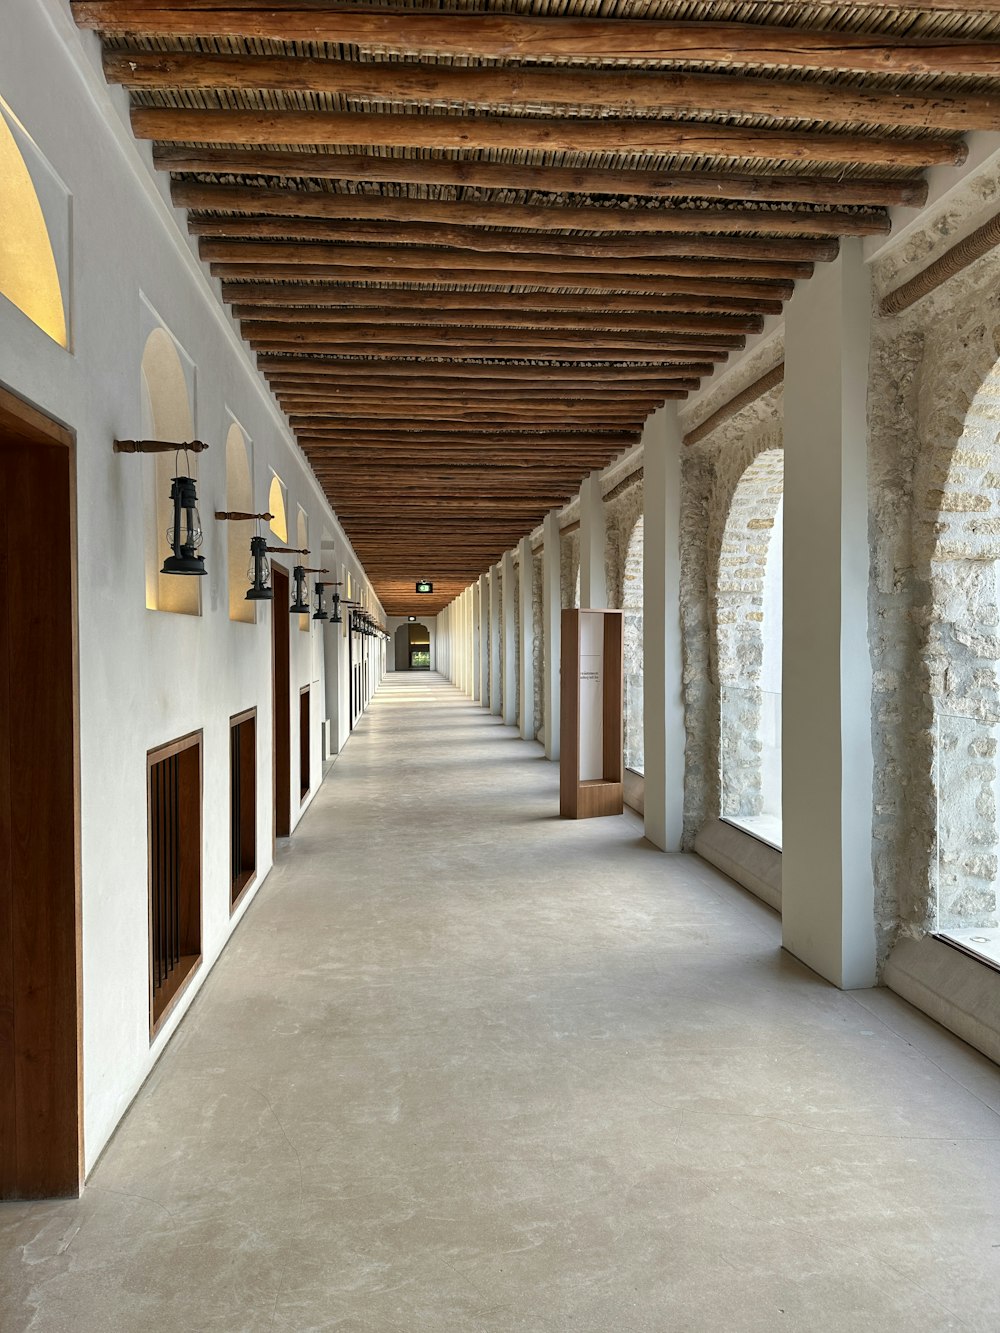 a long hallway with arched windows and a ceiling made of wood